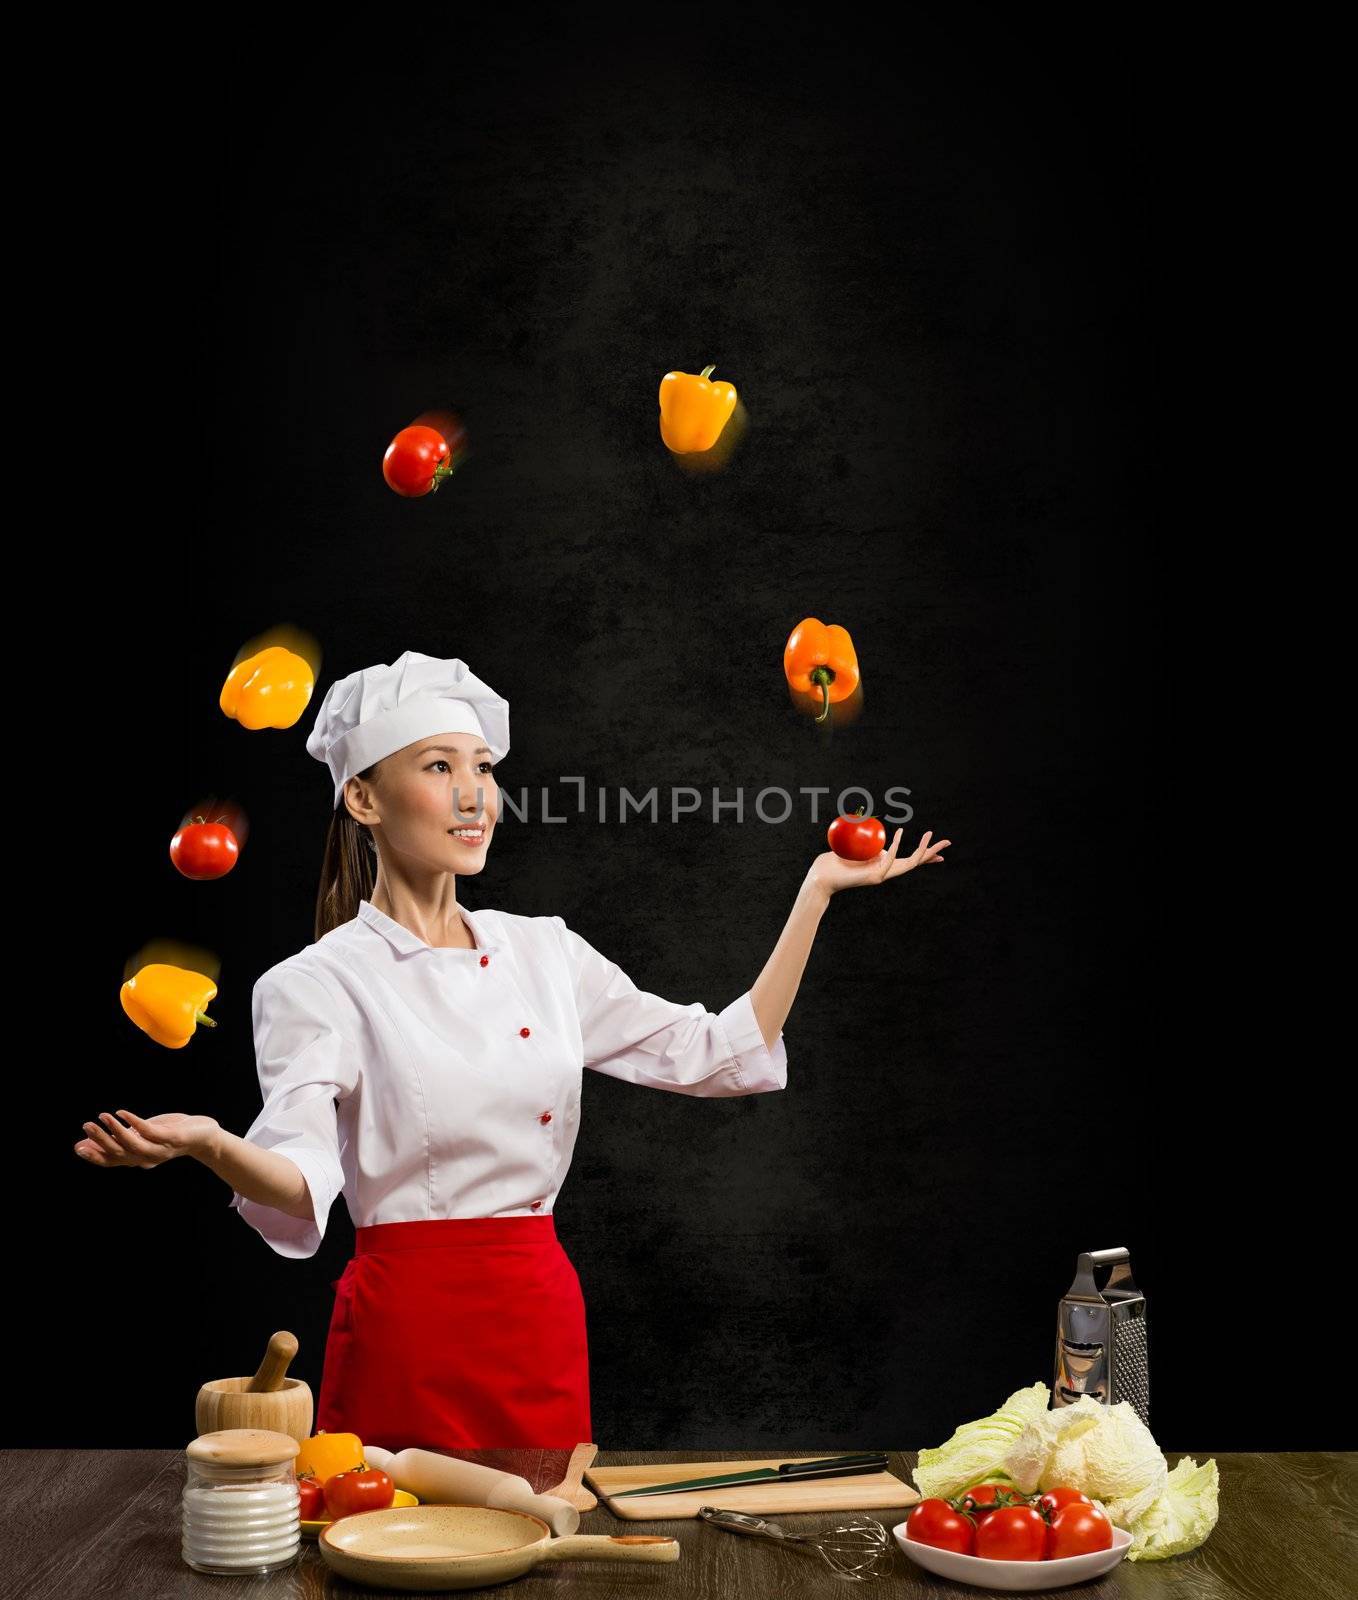 Asian woman chef juggling with vegetables, cooking skills